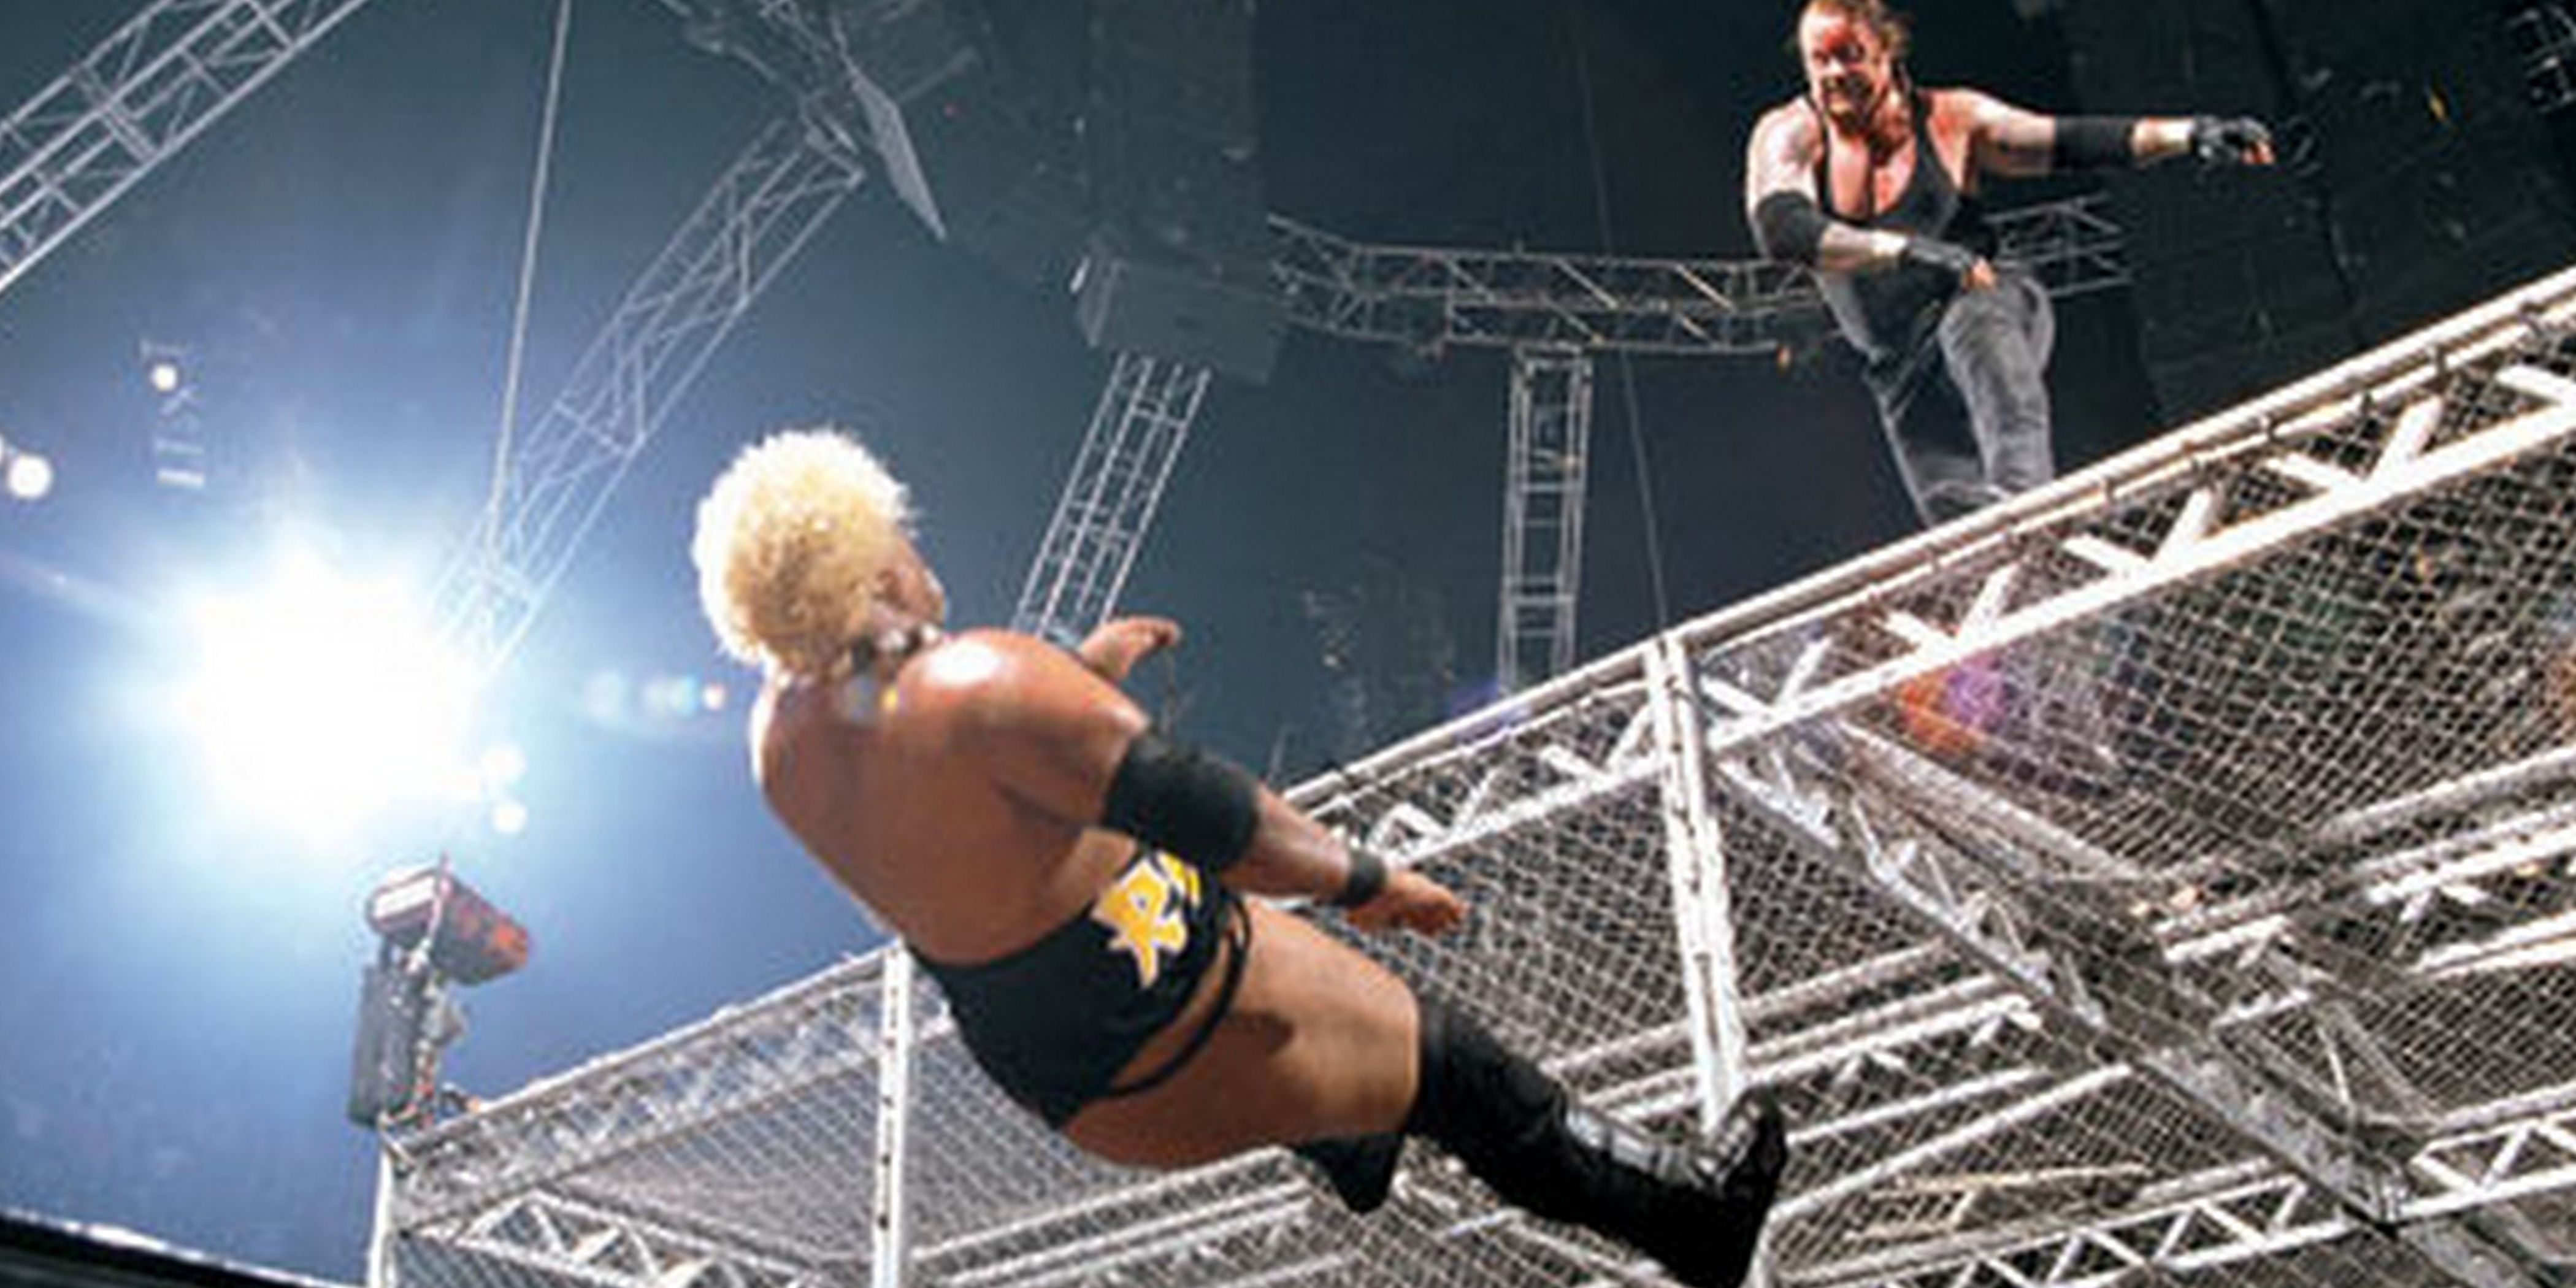 Rikishi falls from the roof of the cell